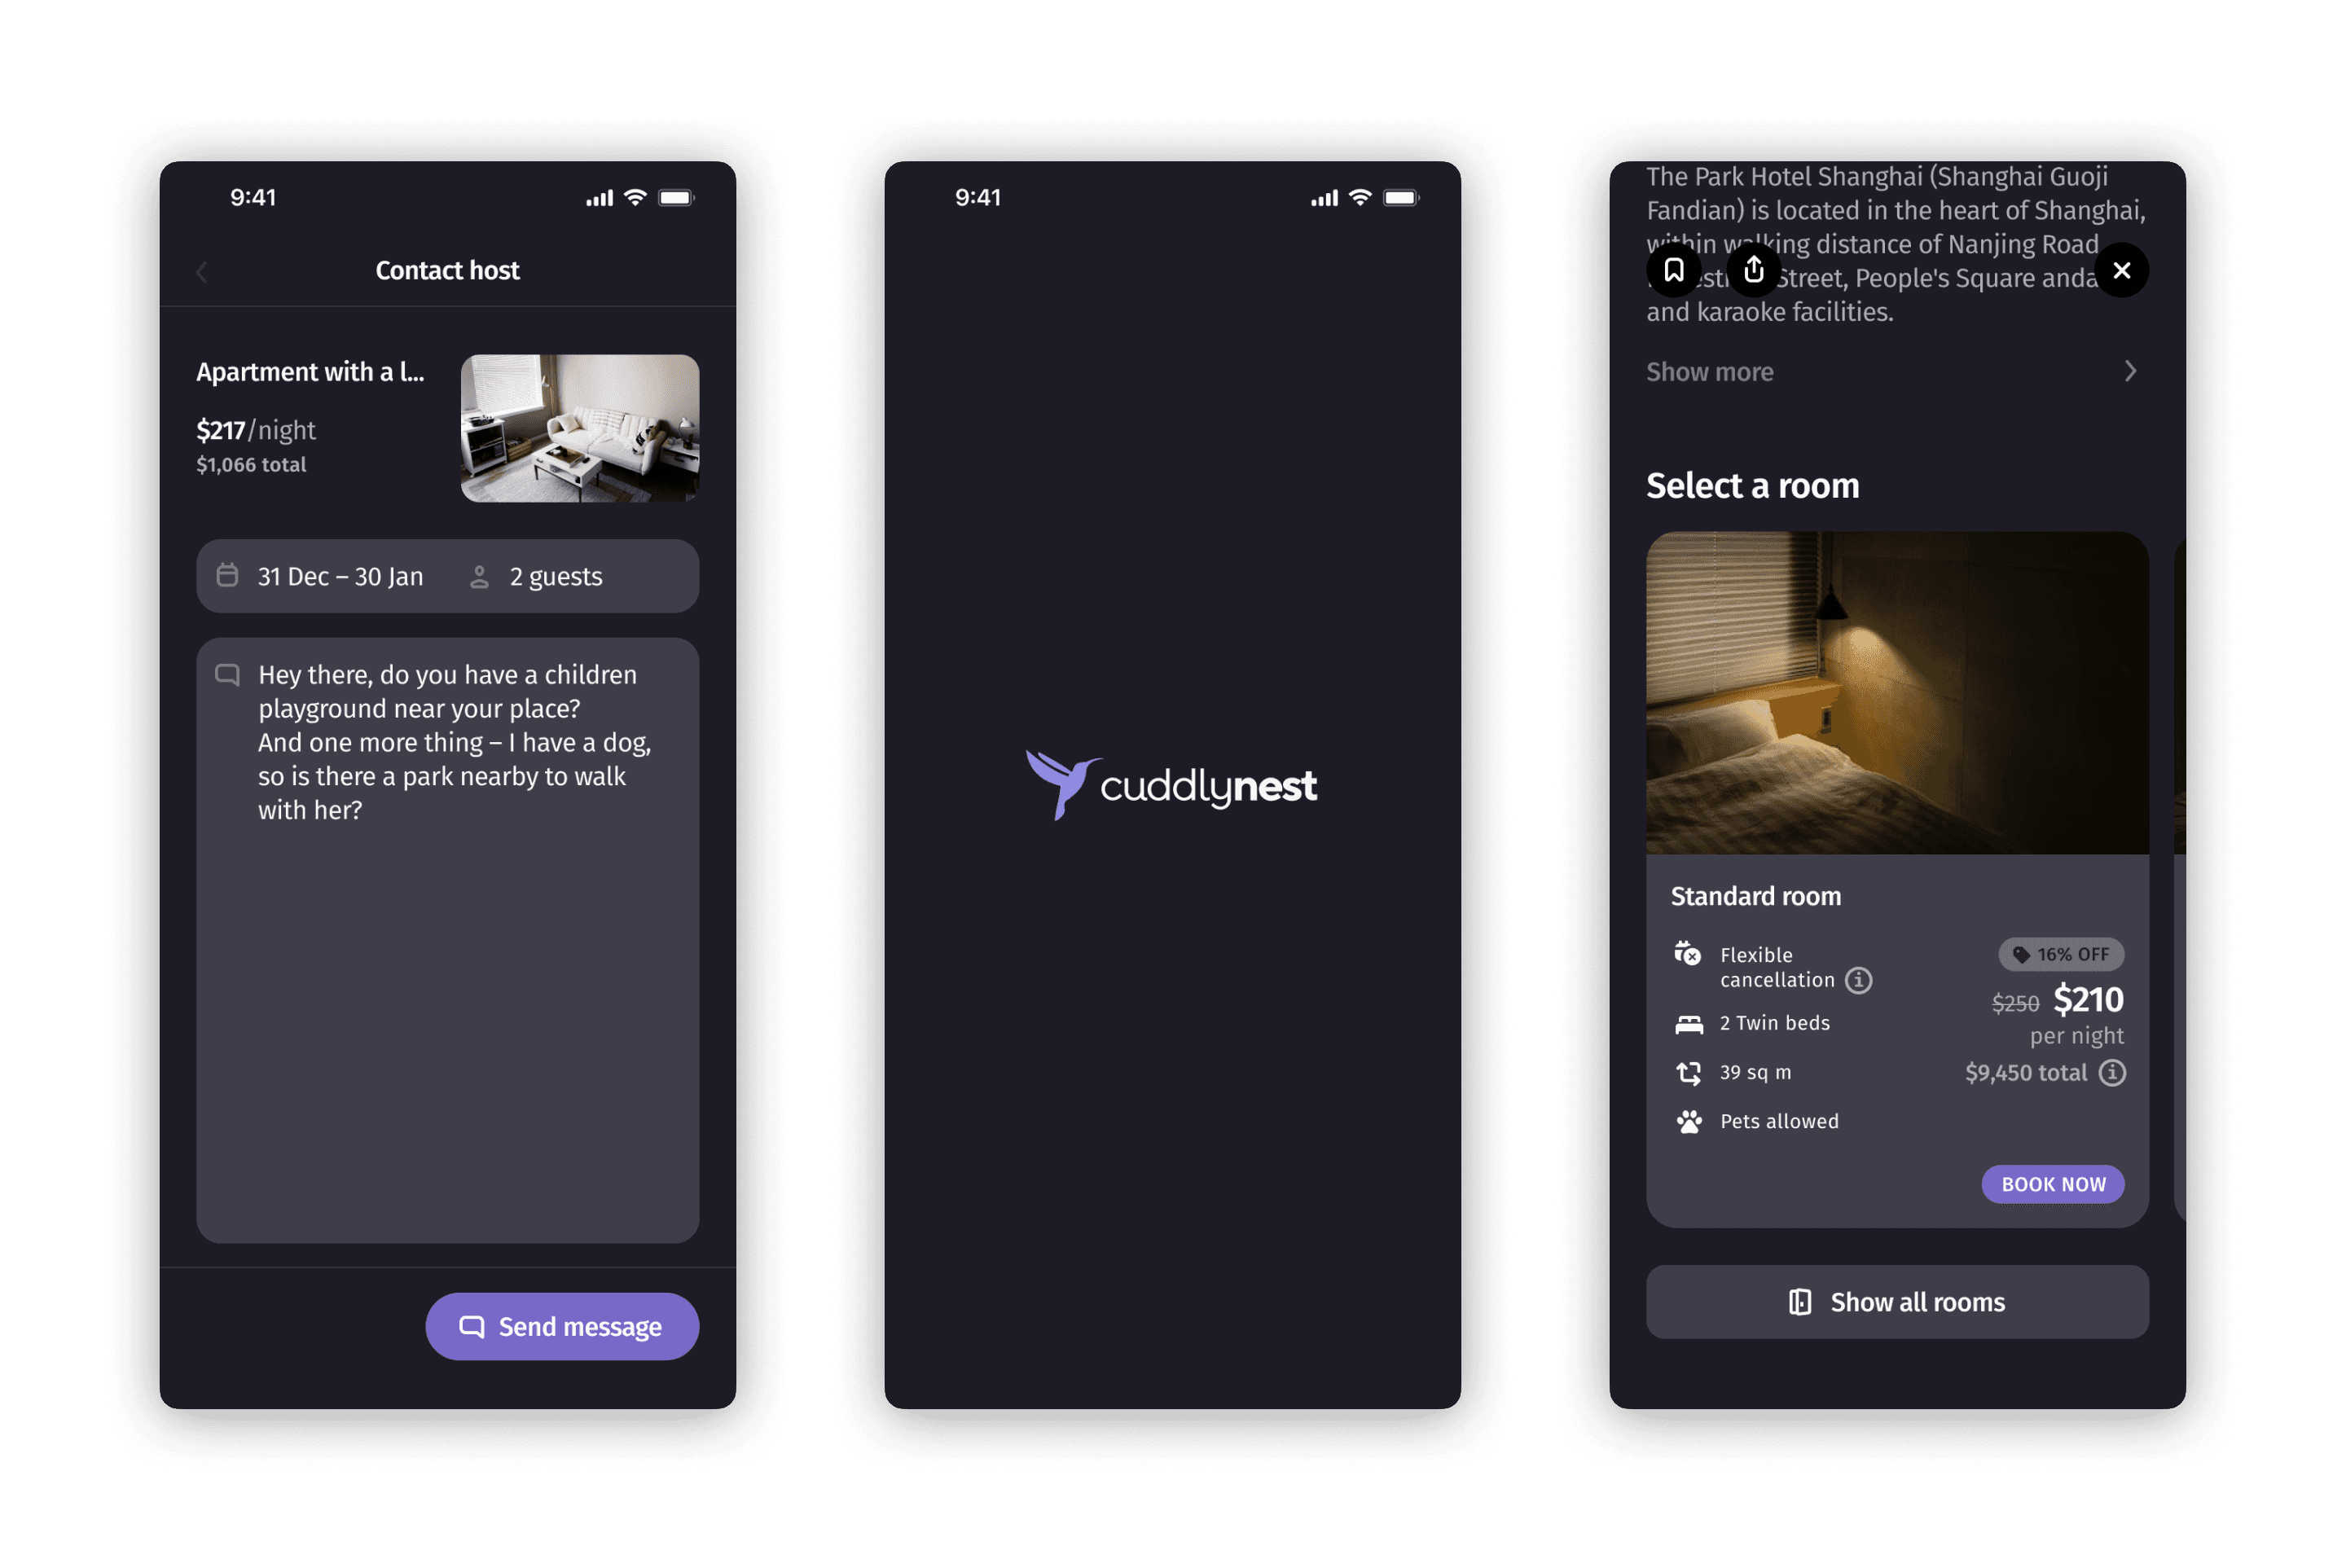 Three images of the app in the dark mode: contact host screen, splash screen with logo and select room screen